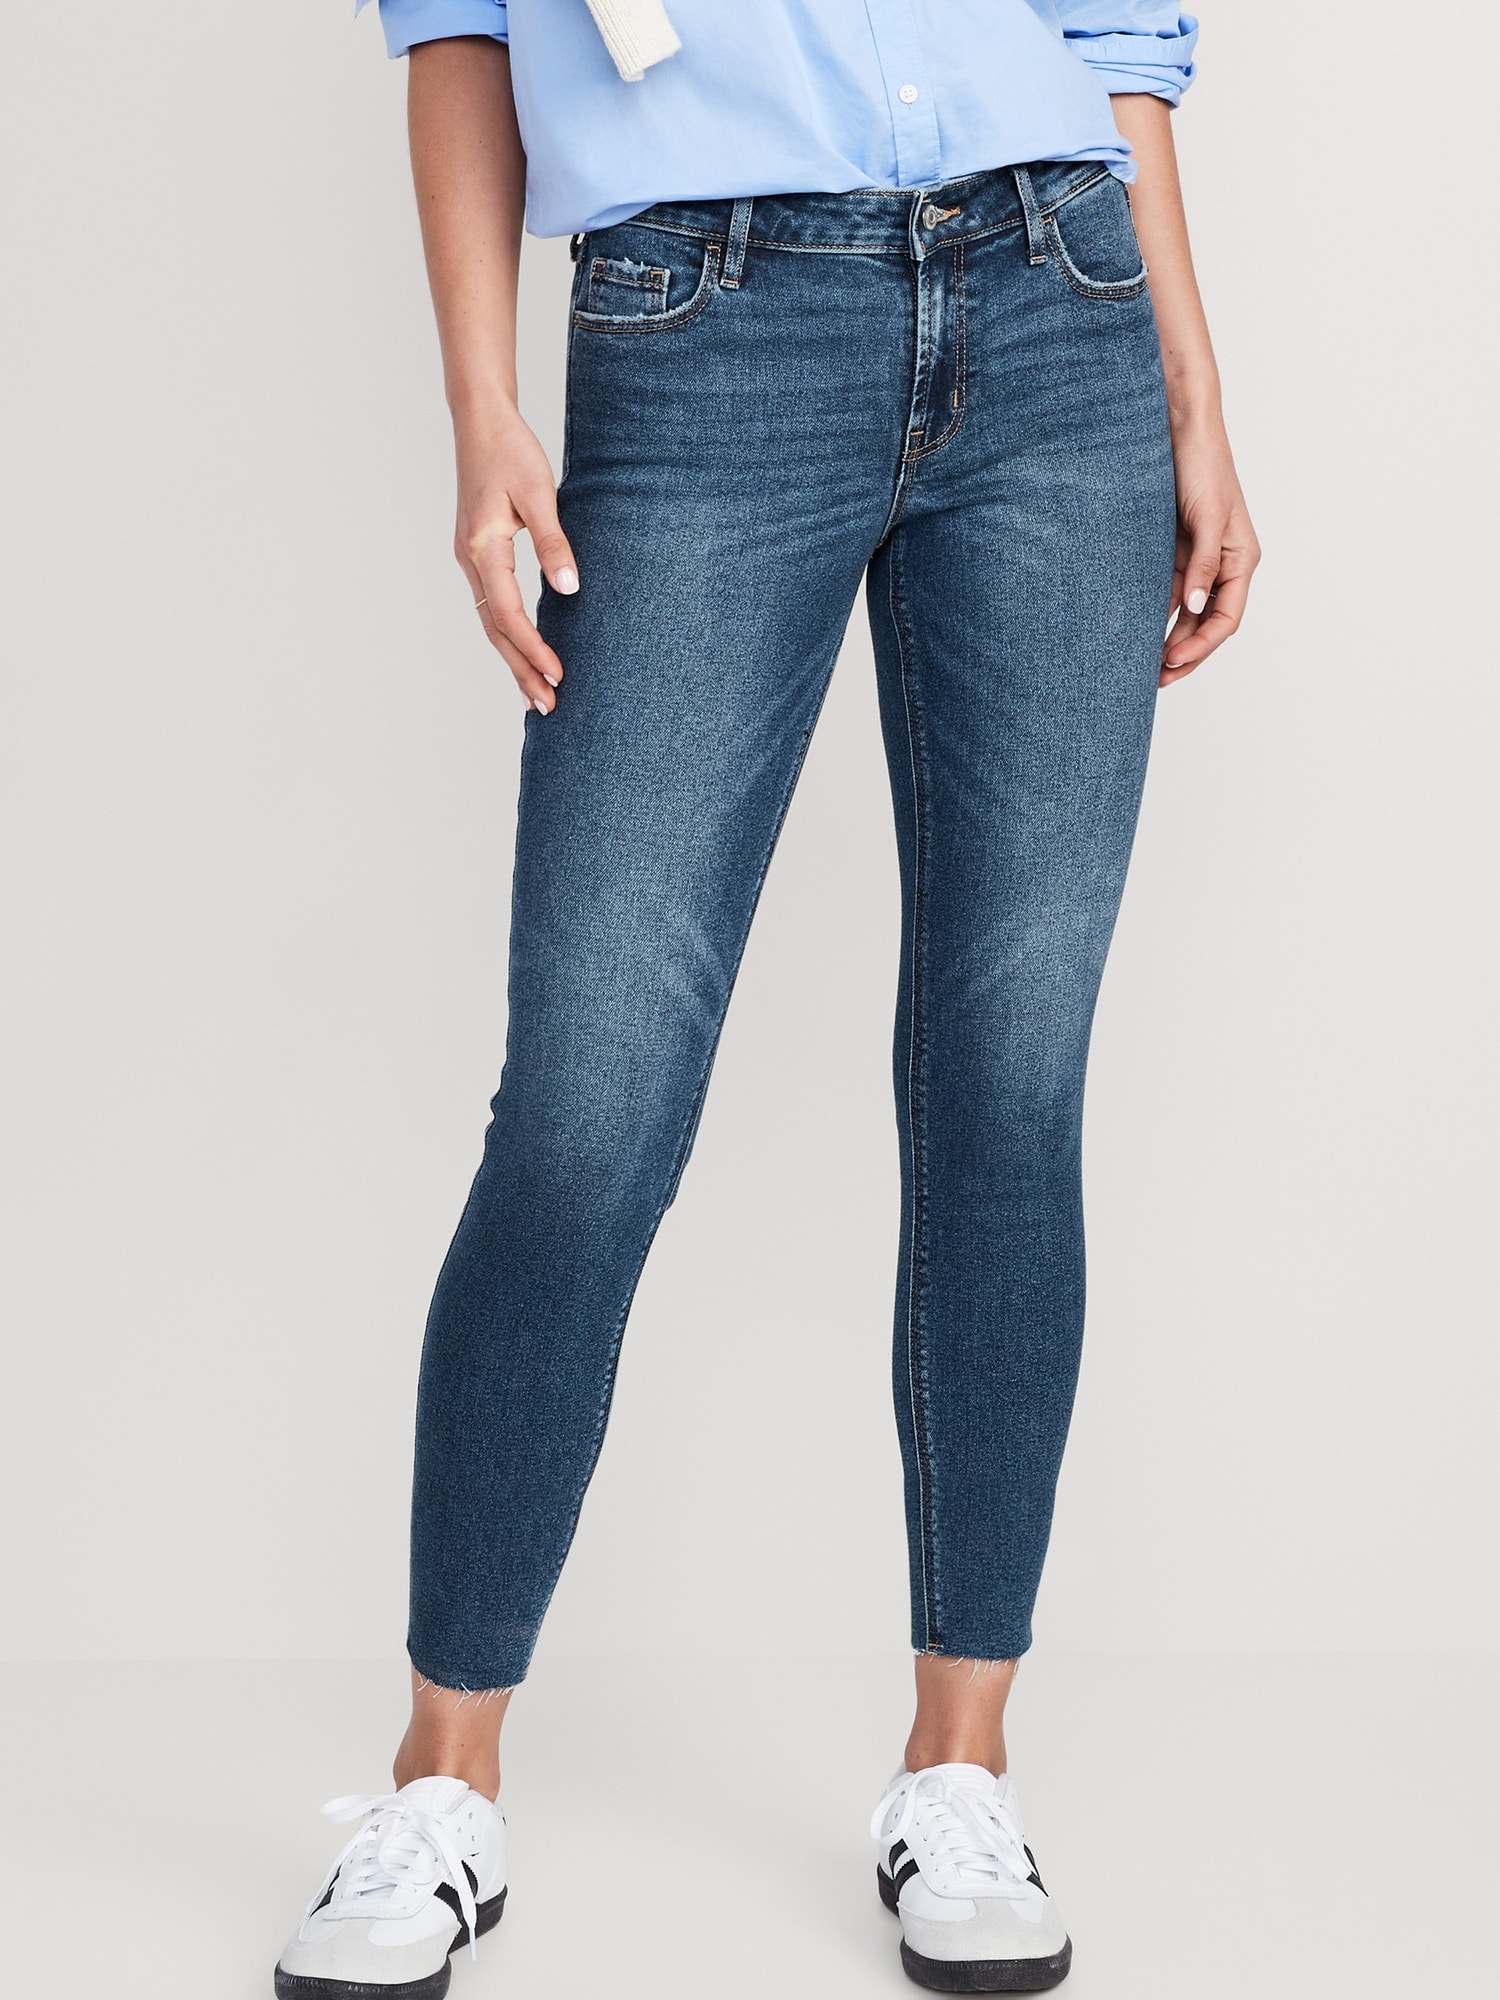 Super-Skinny Cut-Off Ankle Jeans for Women | Old Navy